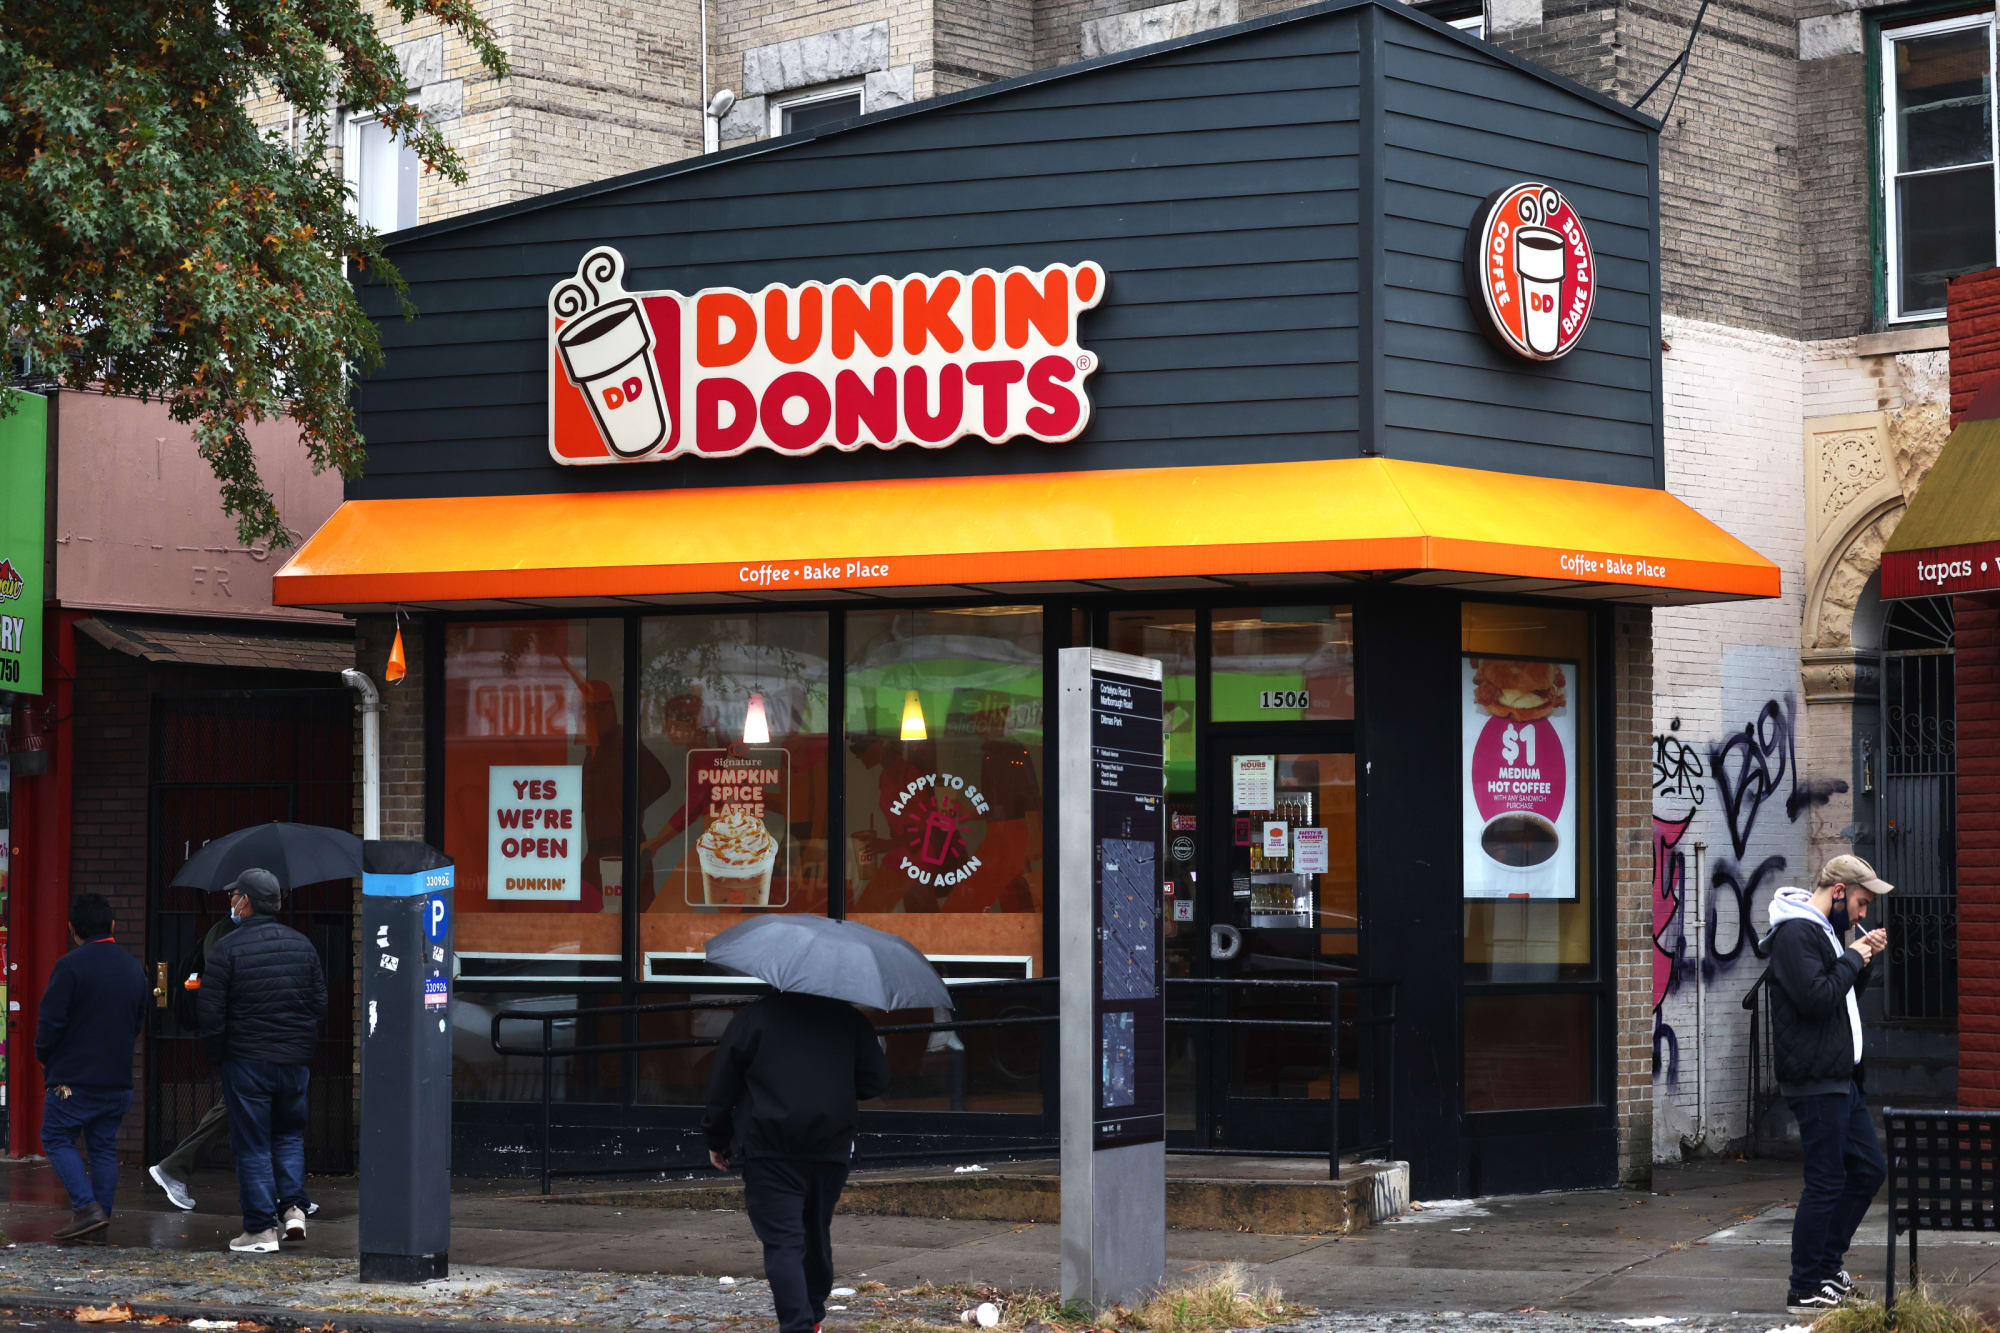 Is Dunkin open on Christmas Day 2021?